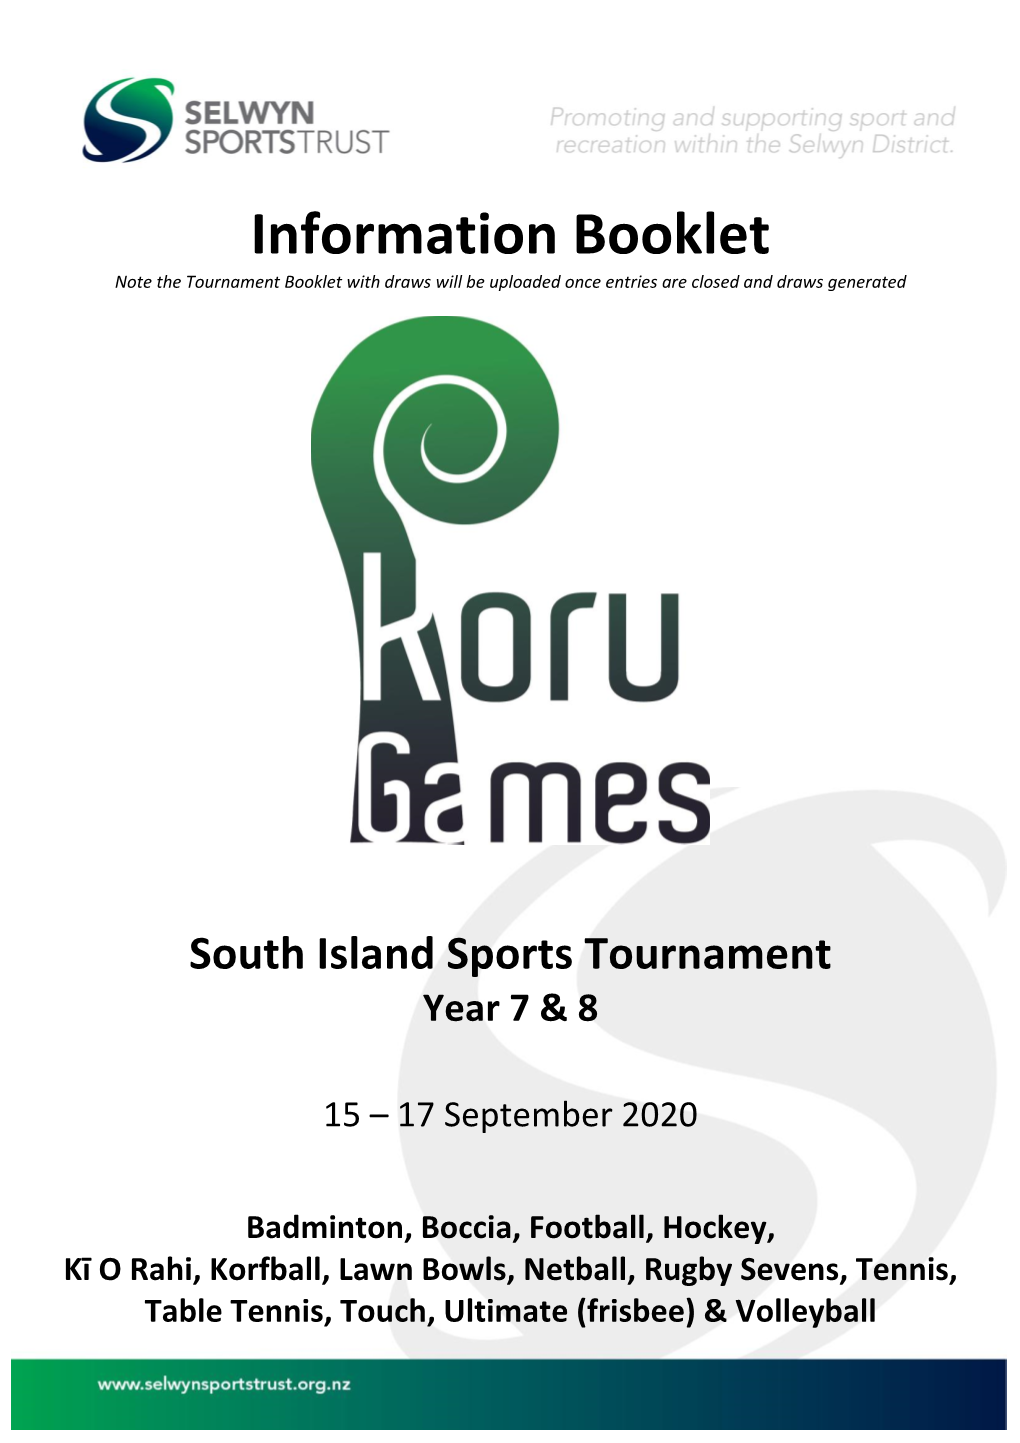 Information Booklet Note the Tournament Booklet with Draws Will Be Uploaded Once Entries Are Closed and Draws Generated